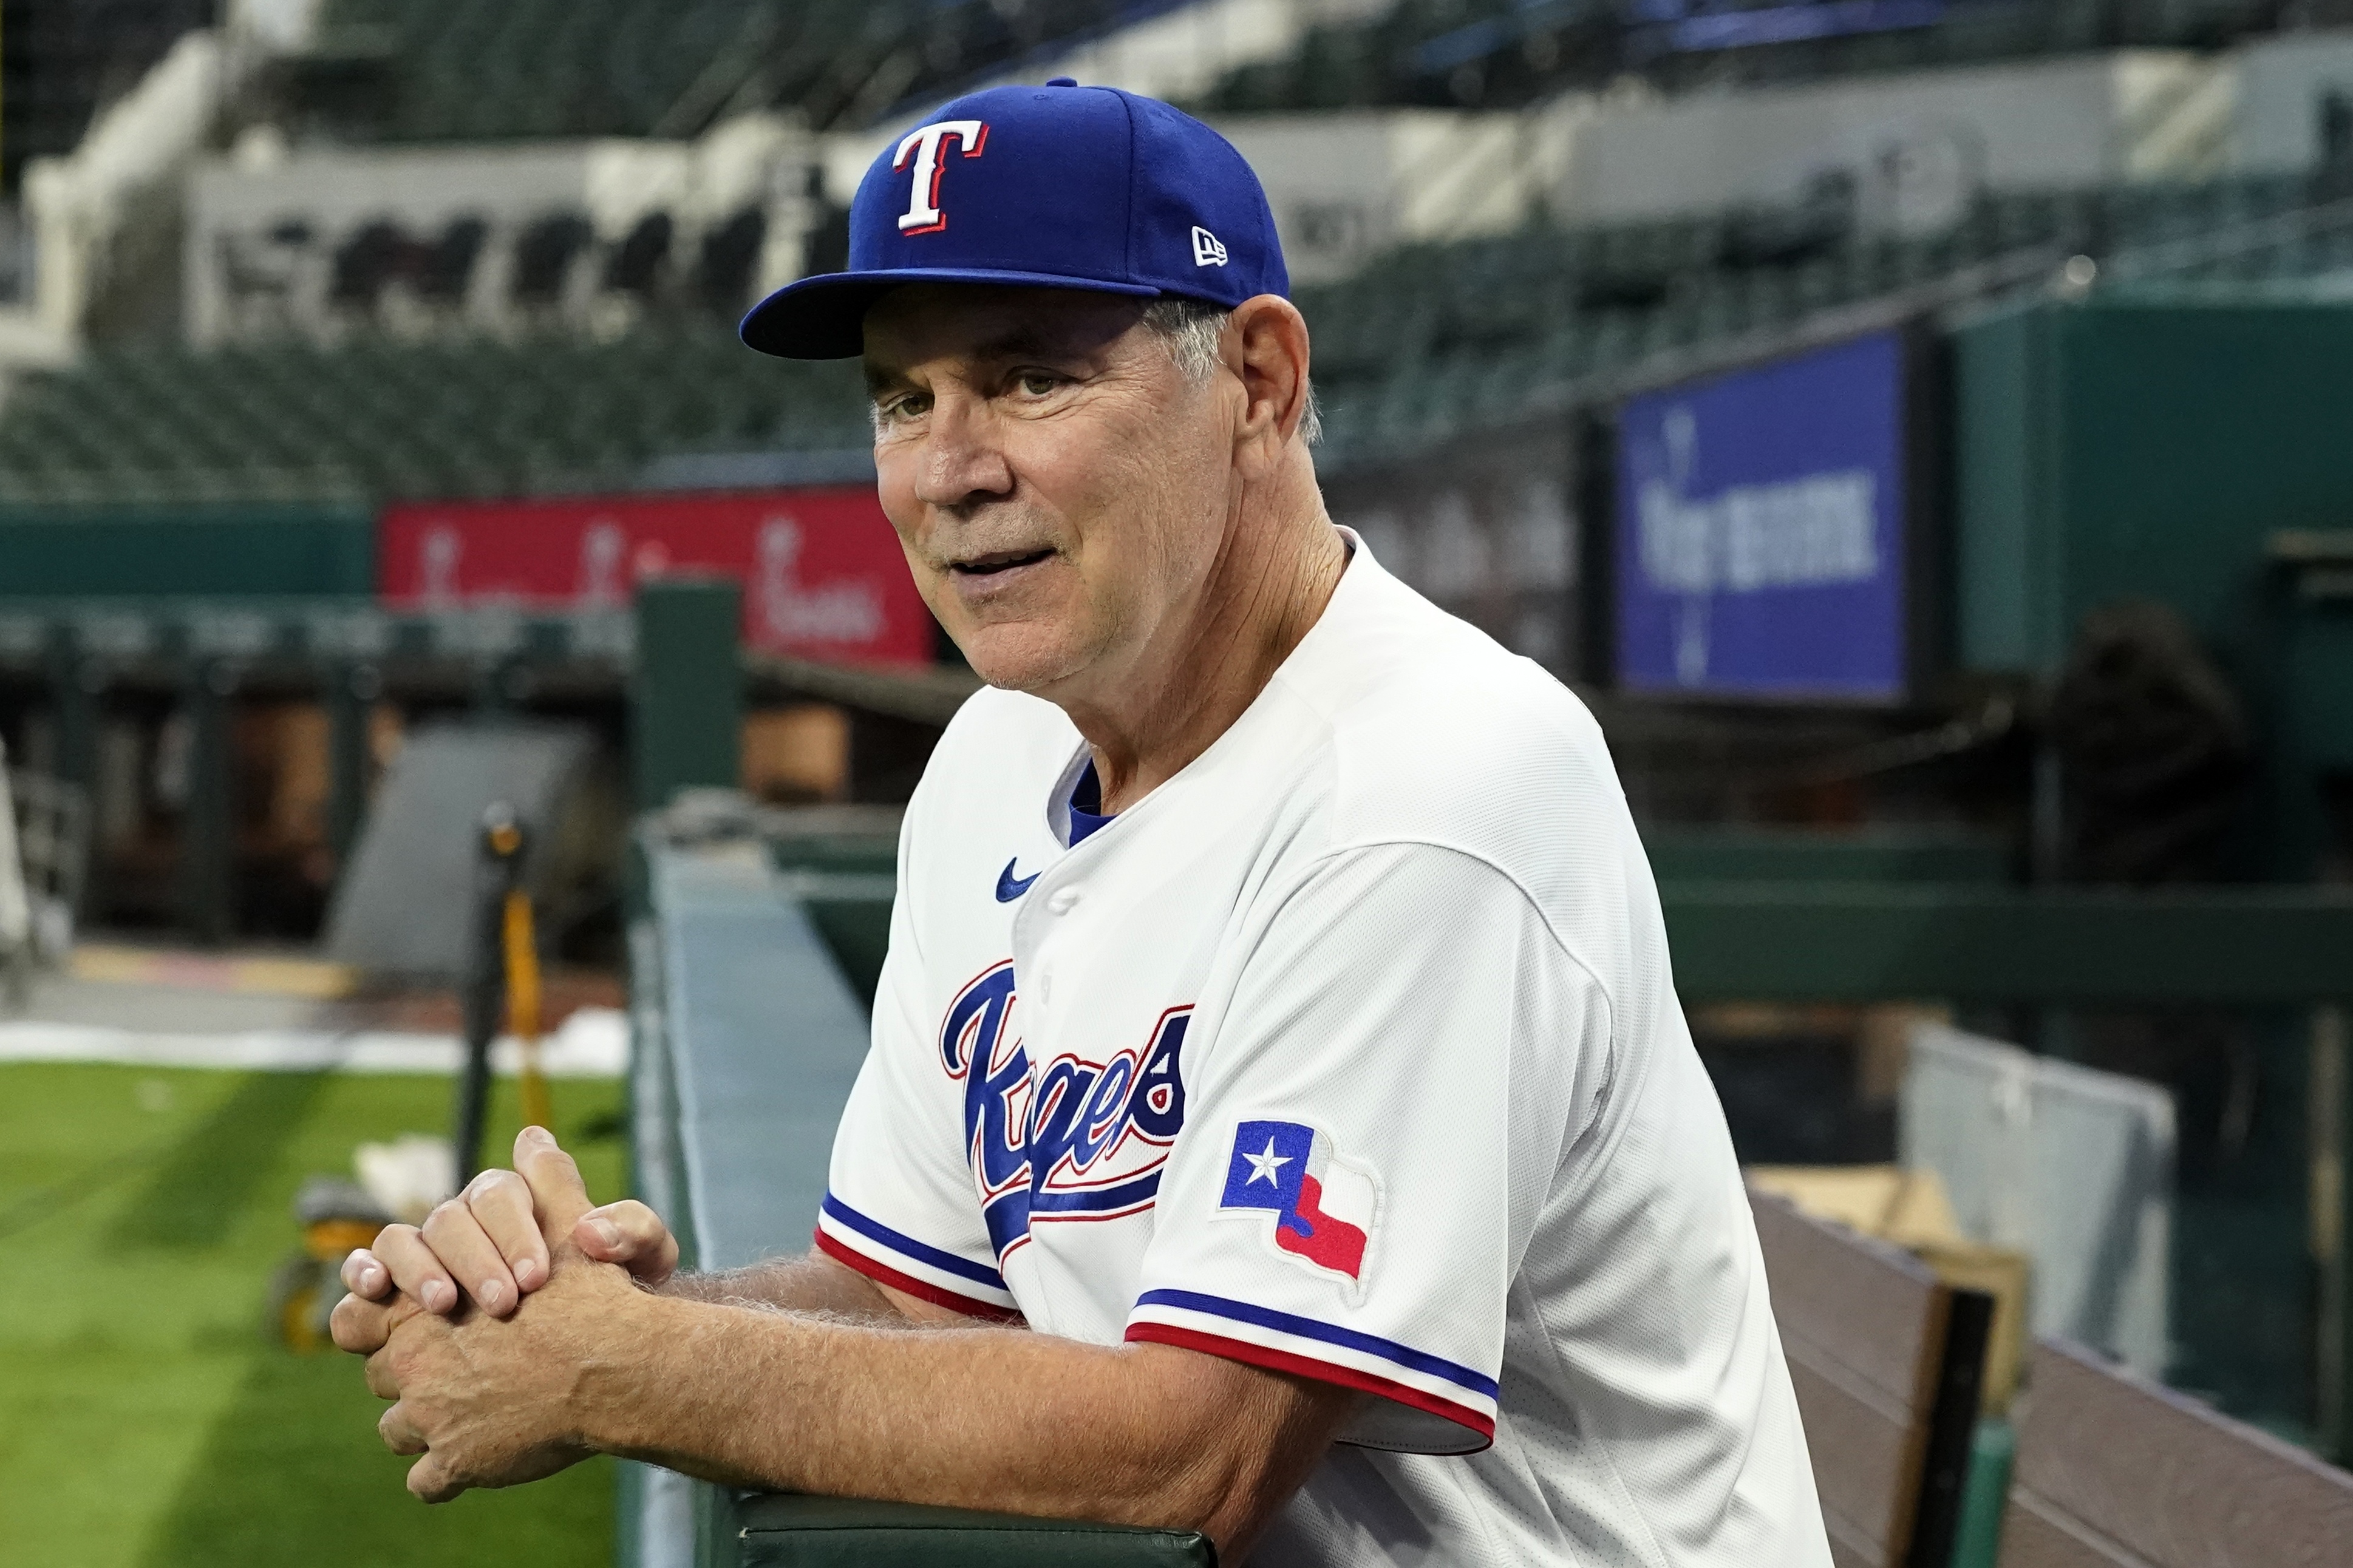 The Rangers are slumping, but Bruce Bochy's demeanor hasn't changed -  Sports Illustrated